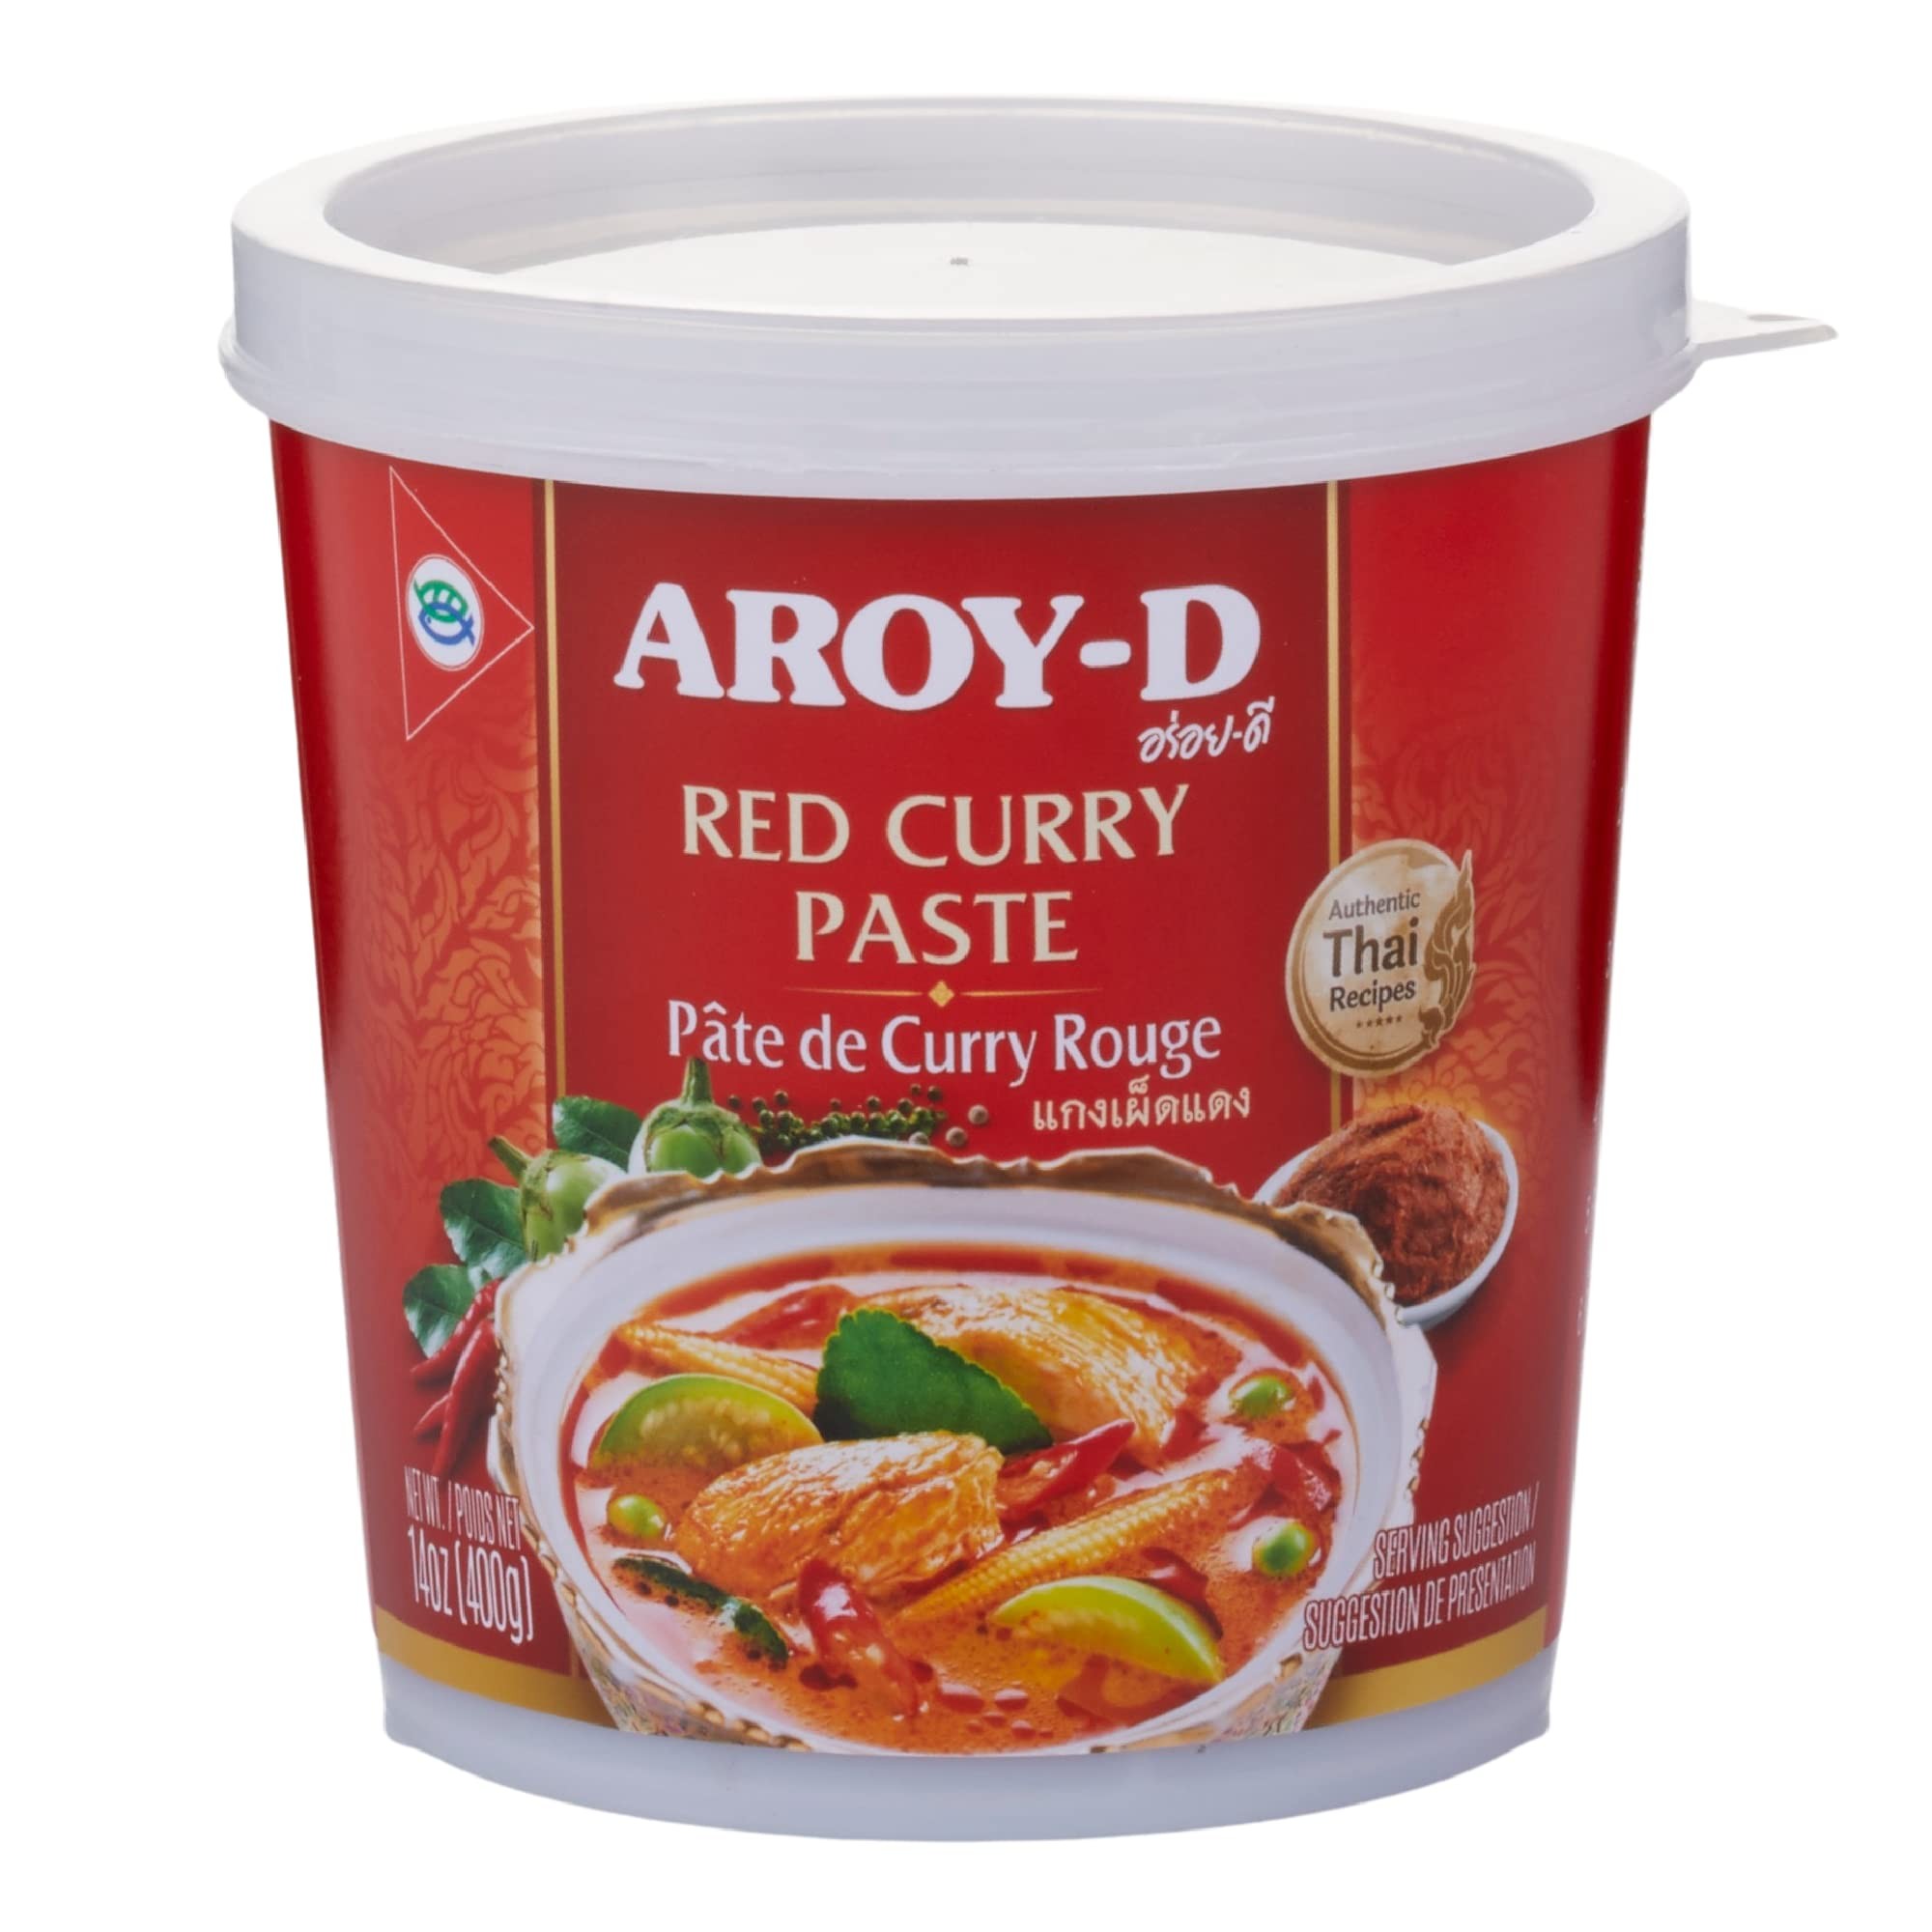 aroy-d-red-curry-paste